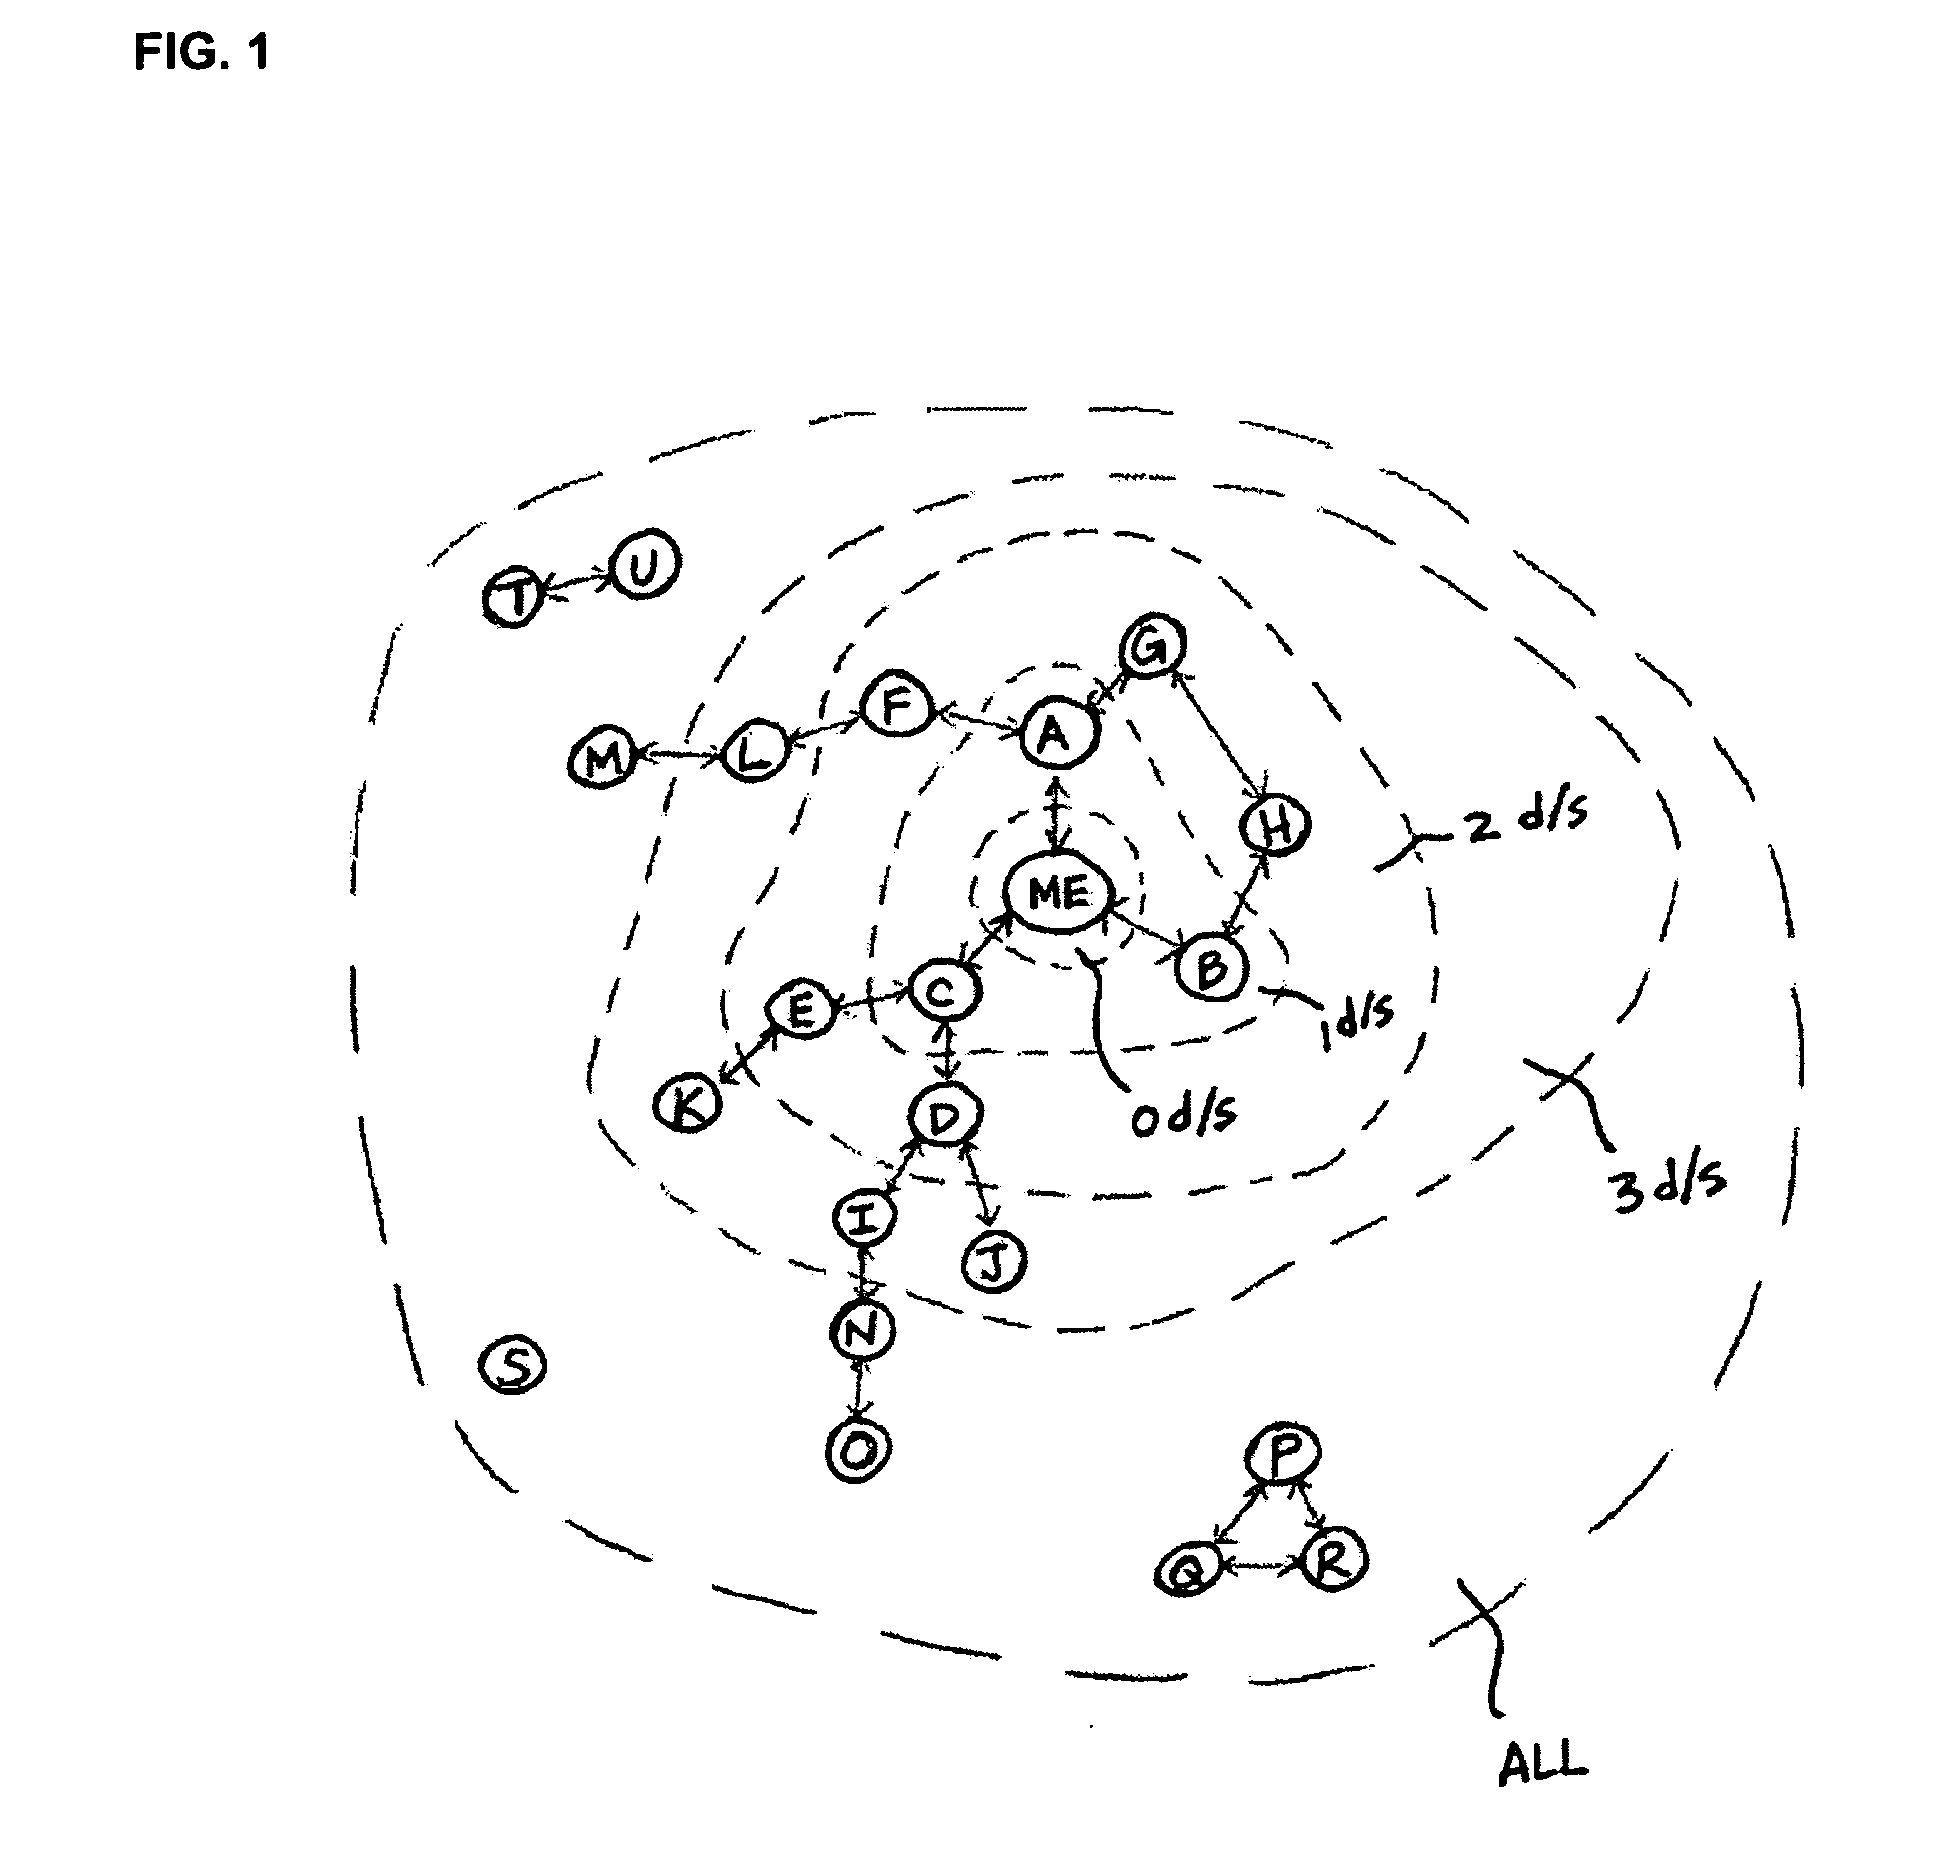 System and method for managing an online social network